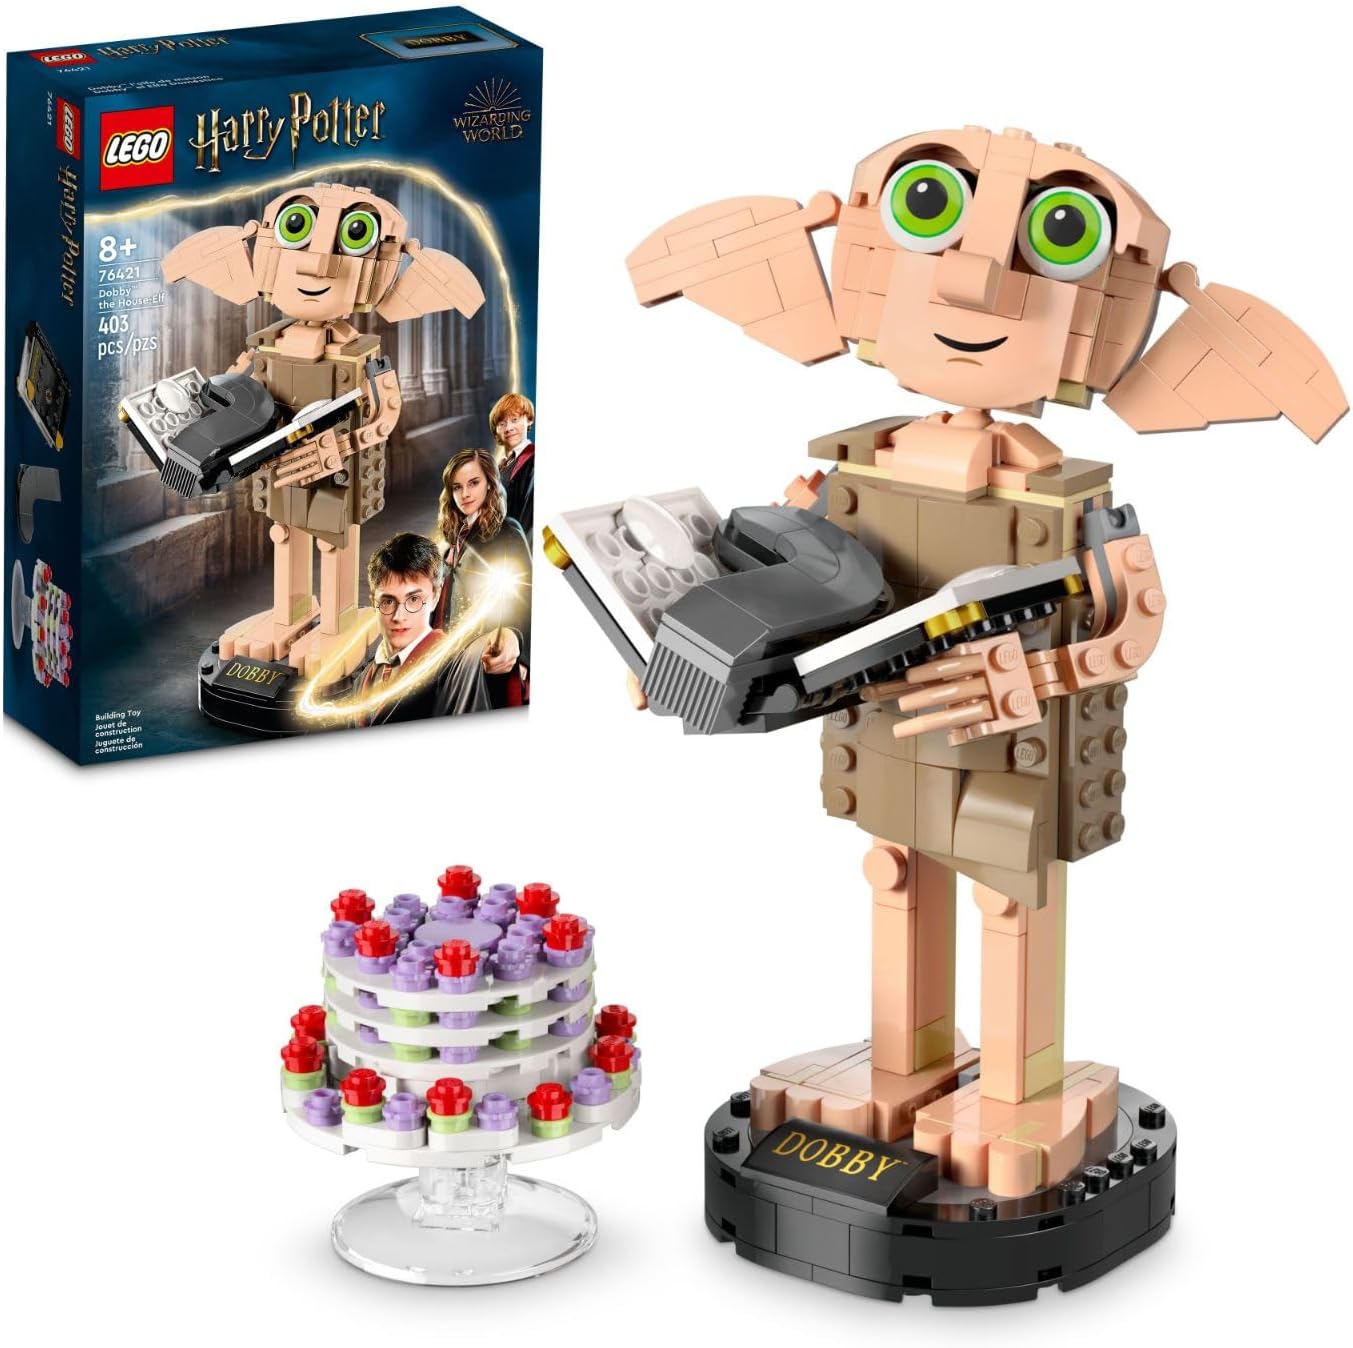 LEGO Harry Potter Dobby The House-Elf Building Toy Set, Build and Display Model of a Beloved Character from The Harry Potter Franchise, for 8 Year Old Boys' and Girls' Birthday, 76421